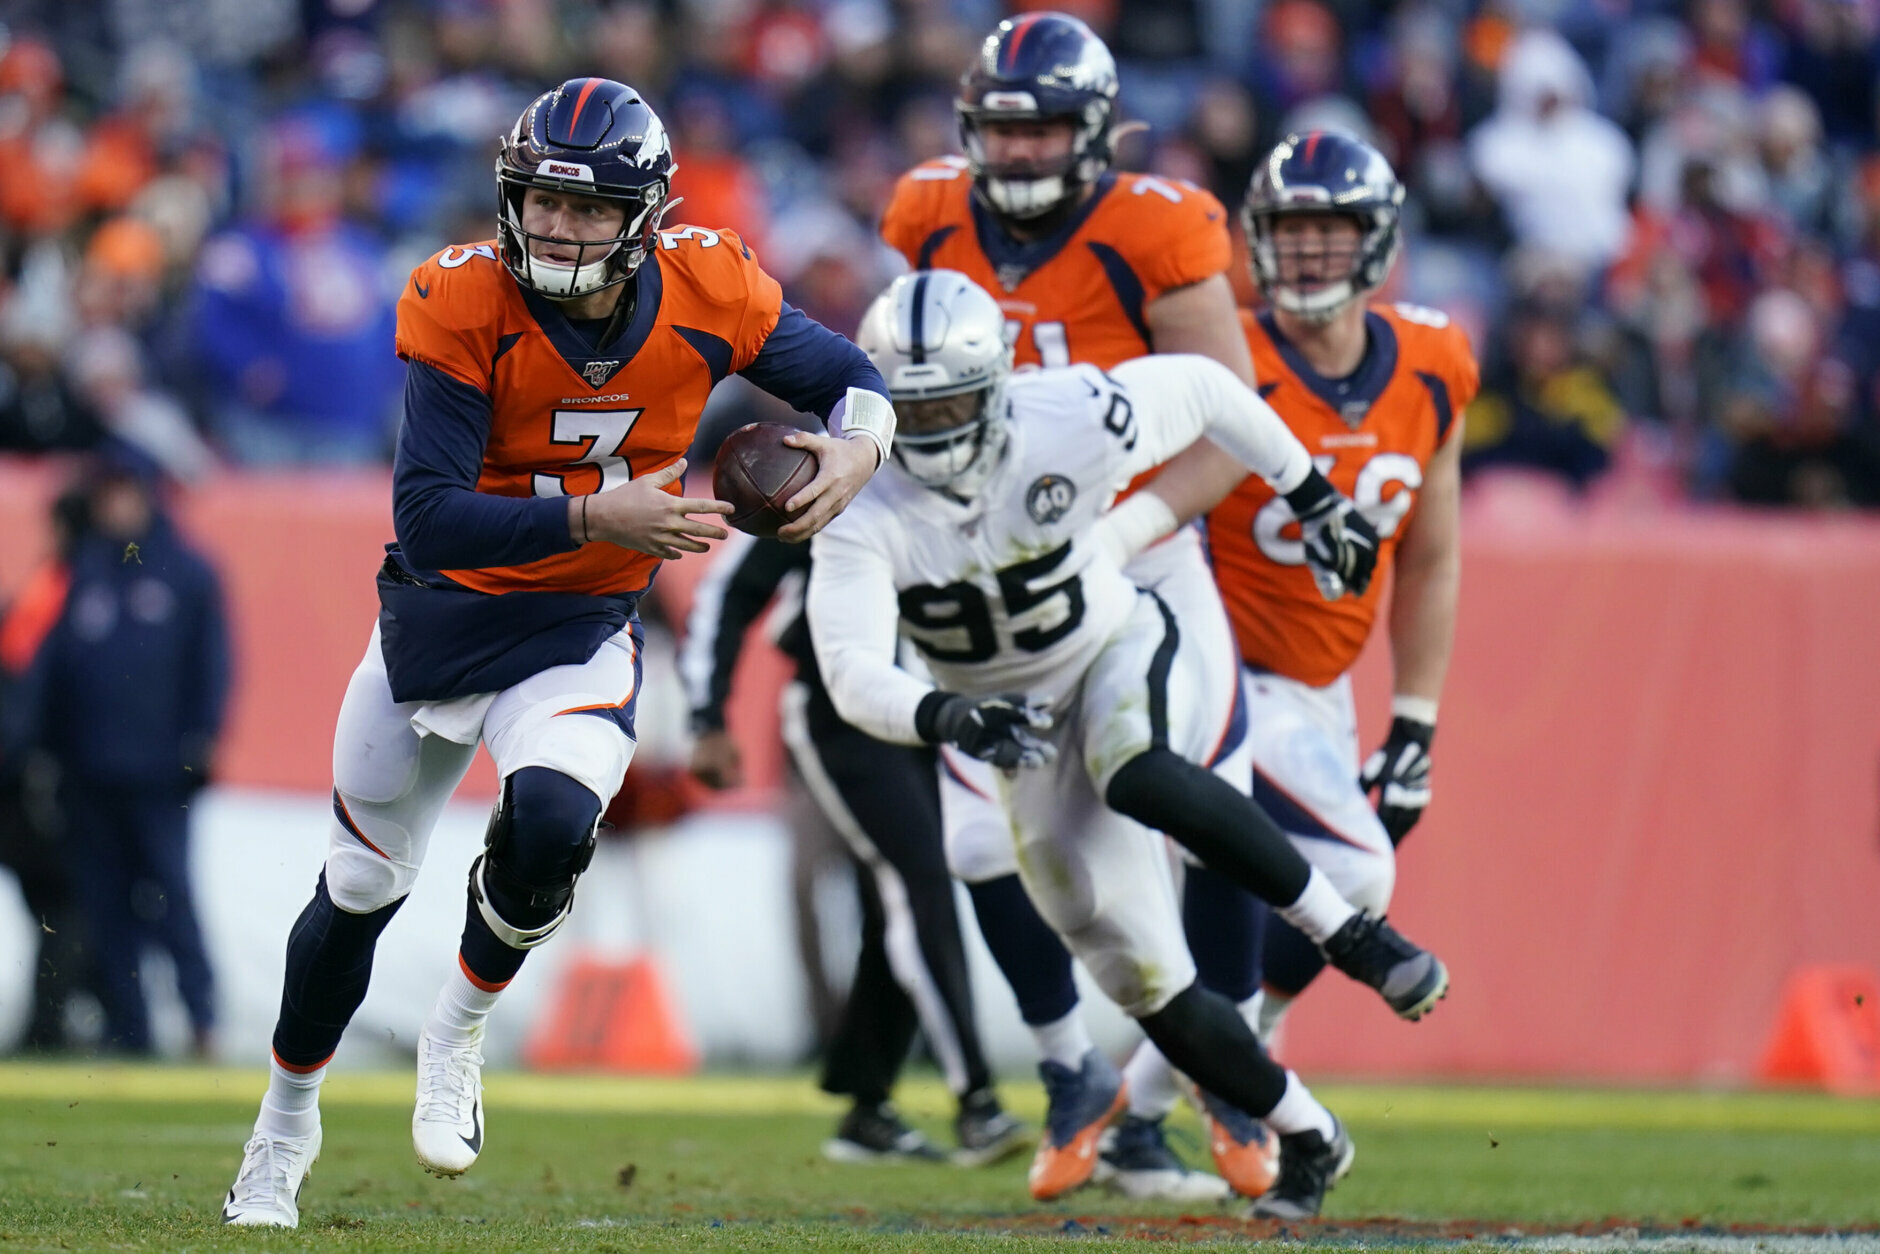 <p><b><i>Raiders 15</i></b><br />
<b><i>Broncos 16</i></b></p>
<p>Not all 7-9 records are created equal. Denver wrapped up a 4-1 stretch with Drew Lock as the starting QB, while Oakland&#8217;s slim playoff chances were dashed in almost every way, including <a href="https://www.espn.com/nfl/recap?gameId=401128036" target="_blank" rel="noopener">Shelby Harris&#8217; haunting of his former team</a> to deal the Raiders their fifth loss in their final six games representing the Bay Area. The Silver and Black limp to Las Vegas with their third straight losing season and 14th since their 2002 Super Bowl run, while the Broncos look a team that could challenge Kansas City in 2020.</p>
